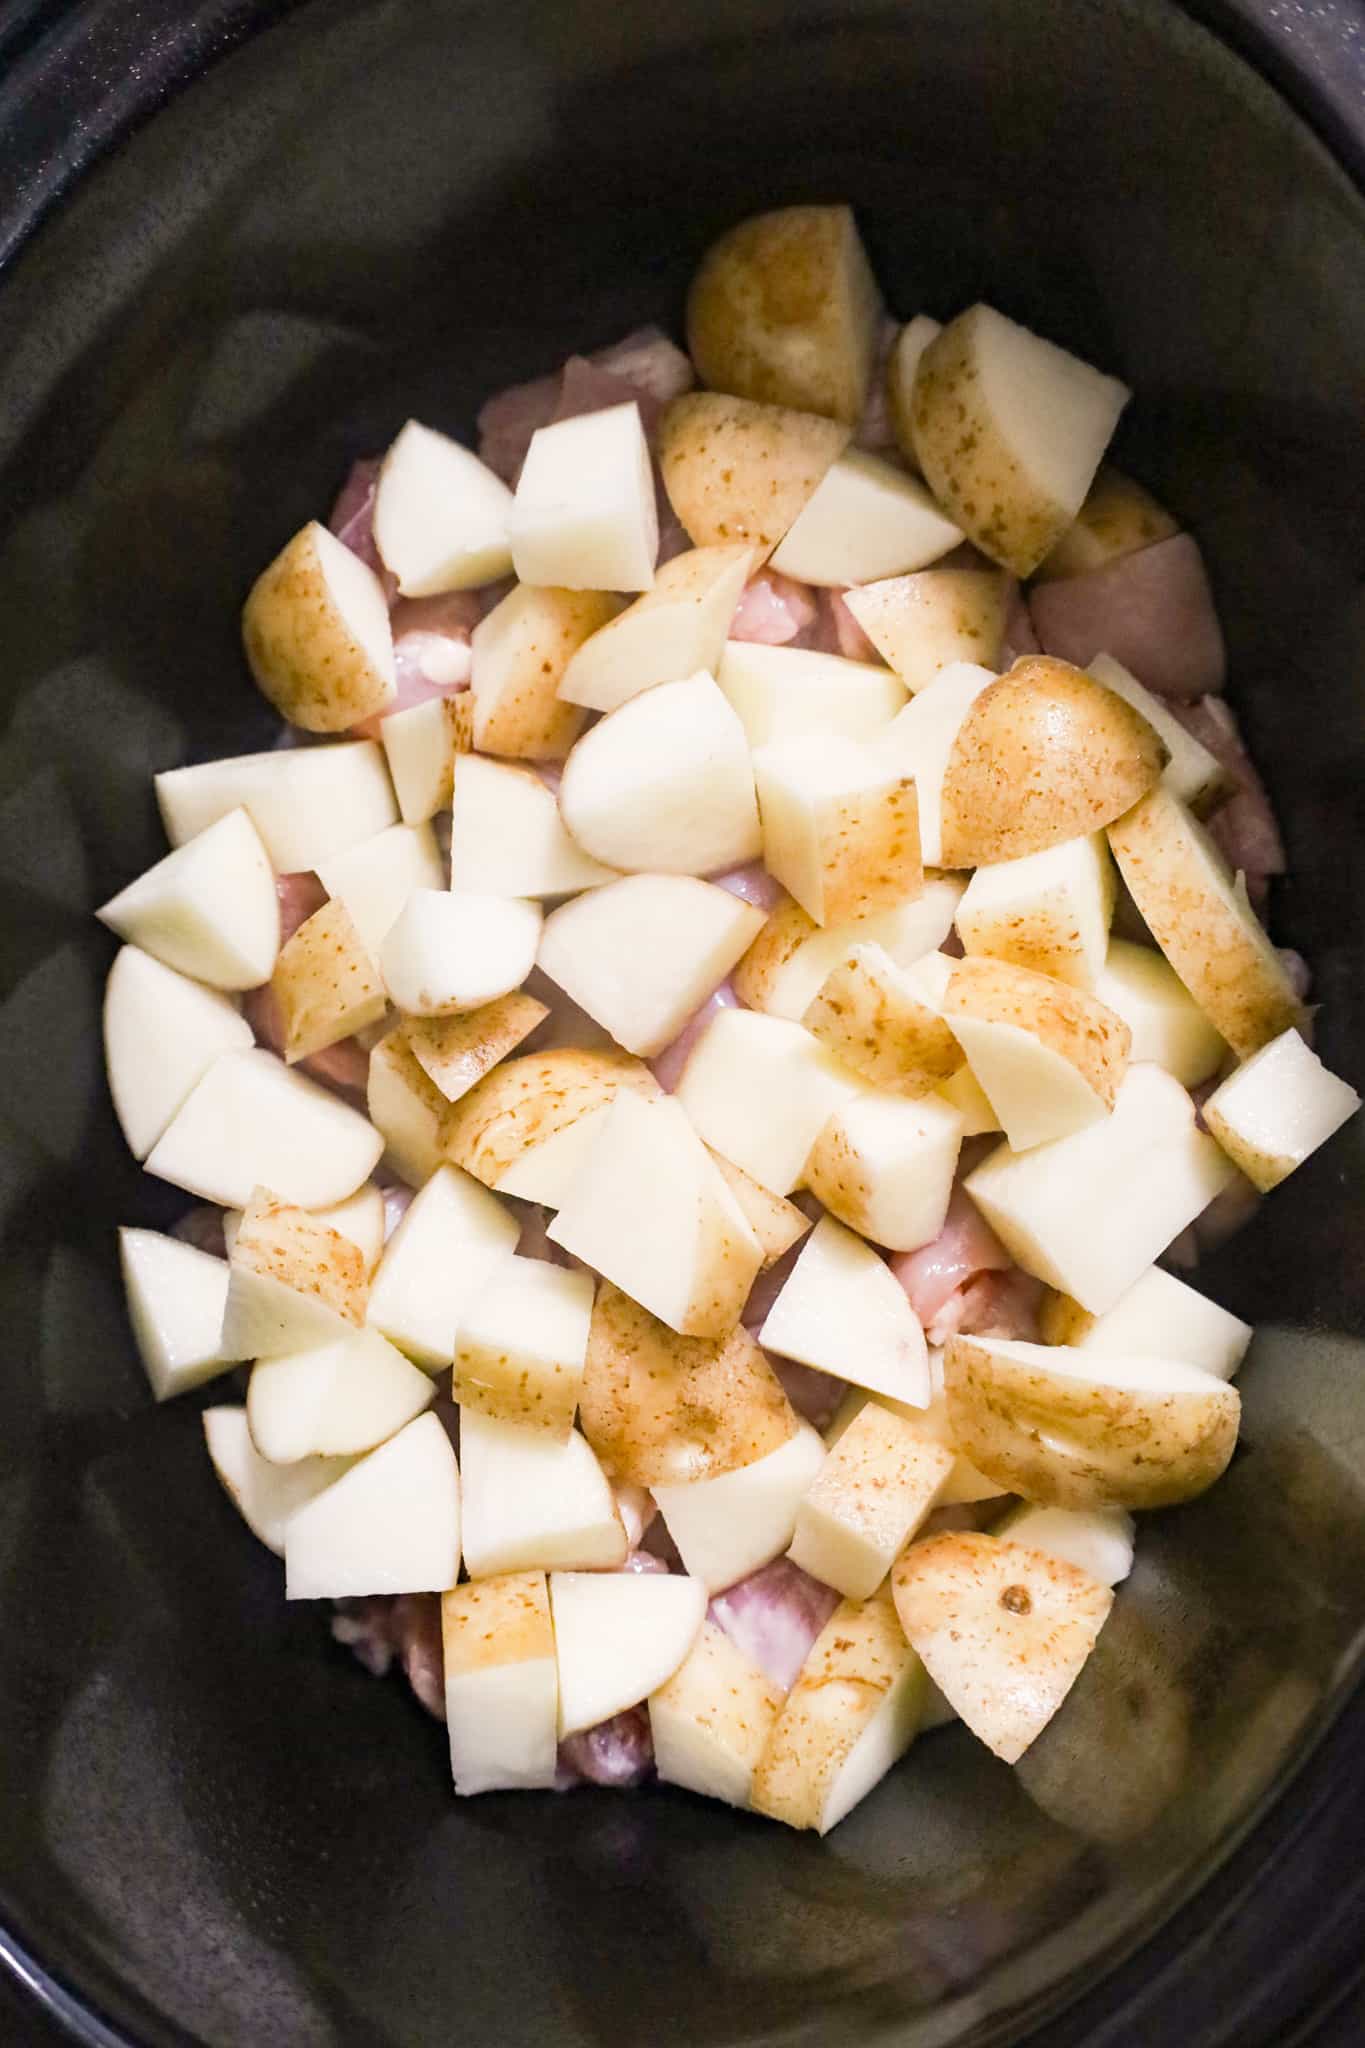 sliced carrots and potato chunks in a crock pot